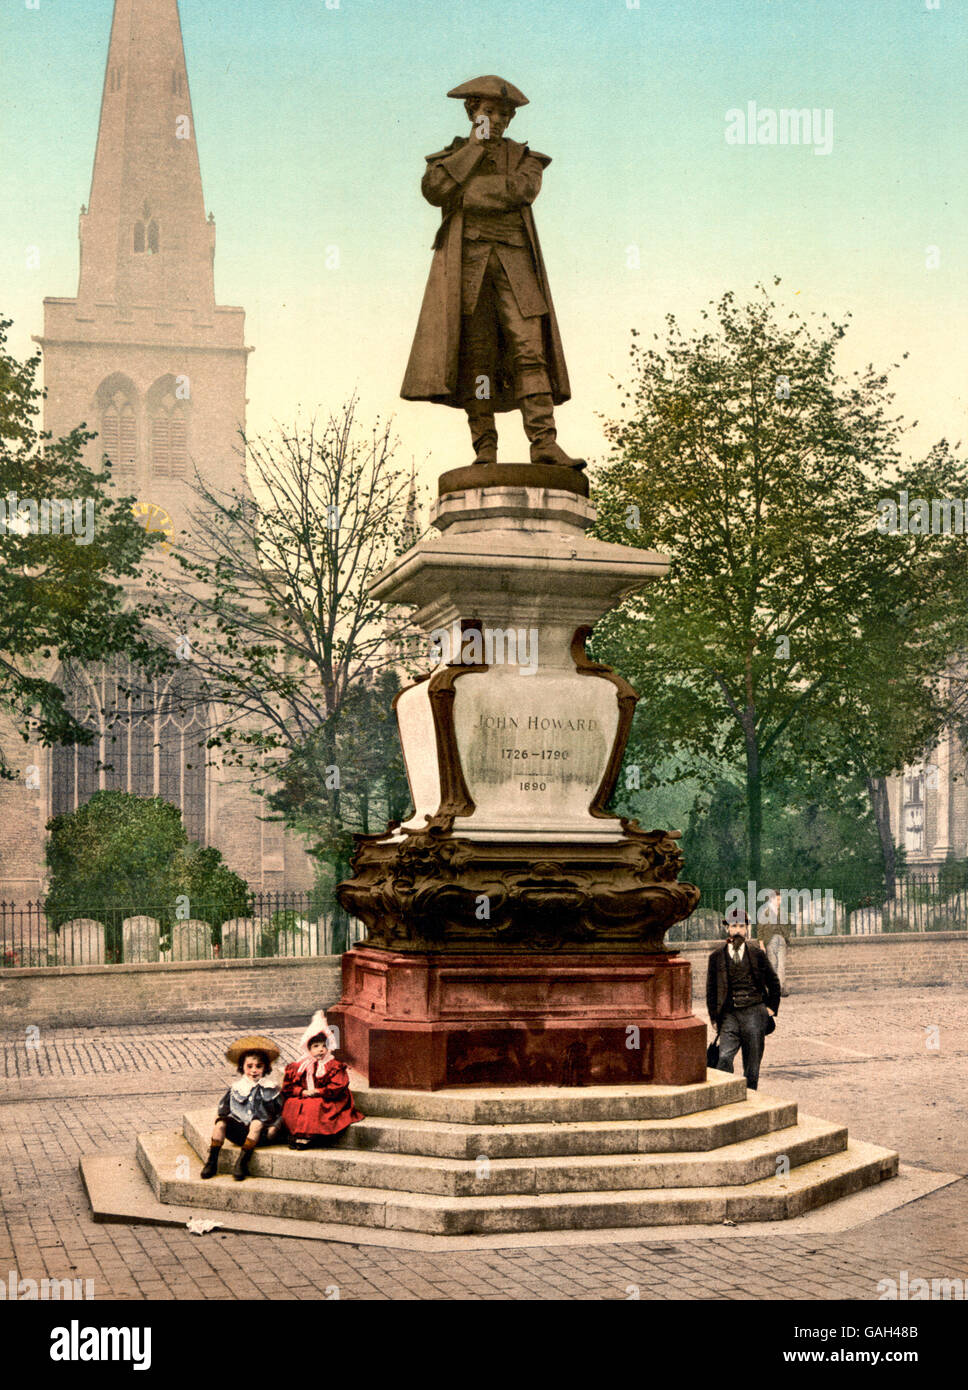 Howard Statue, Bedford, England.  Image shows statue of philanthropist John Howard (1726-1790) who was also a prison reformer. The statue is located in Bedford, England and was made by sculptor Sir Alfred Gilbert (1854-1934). Stock Photo